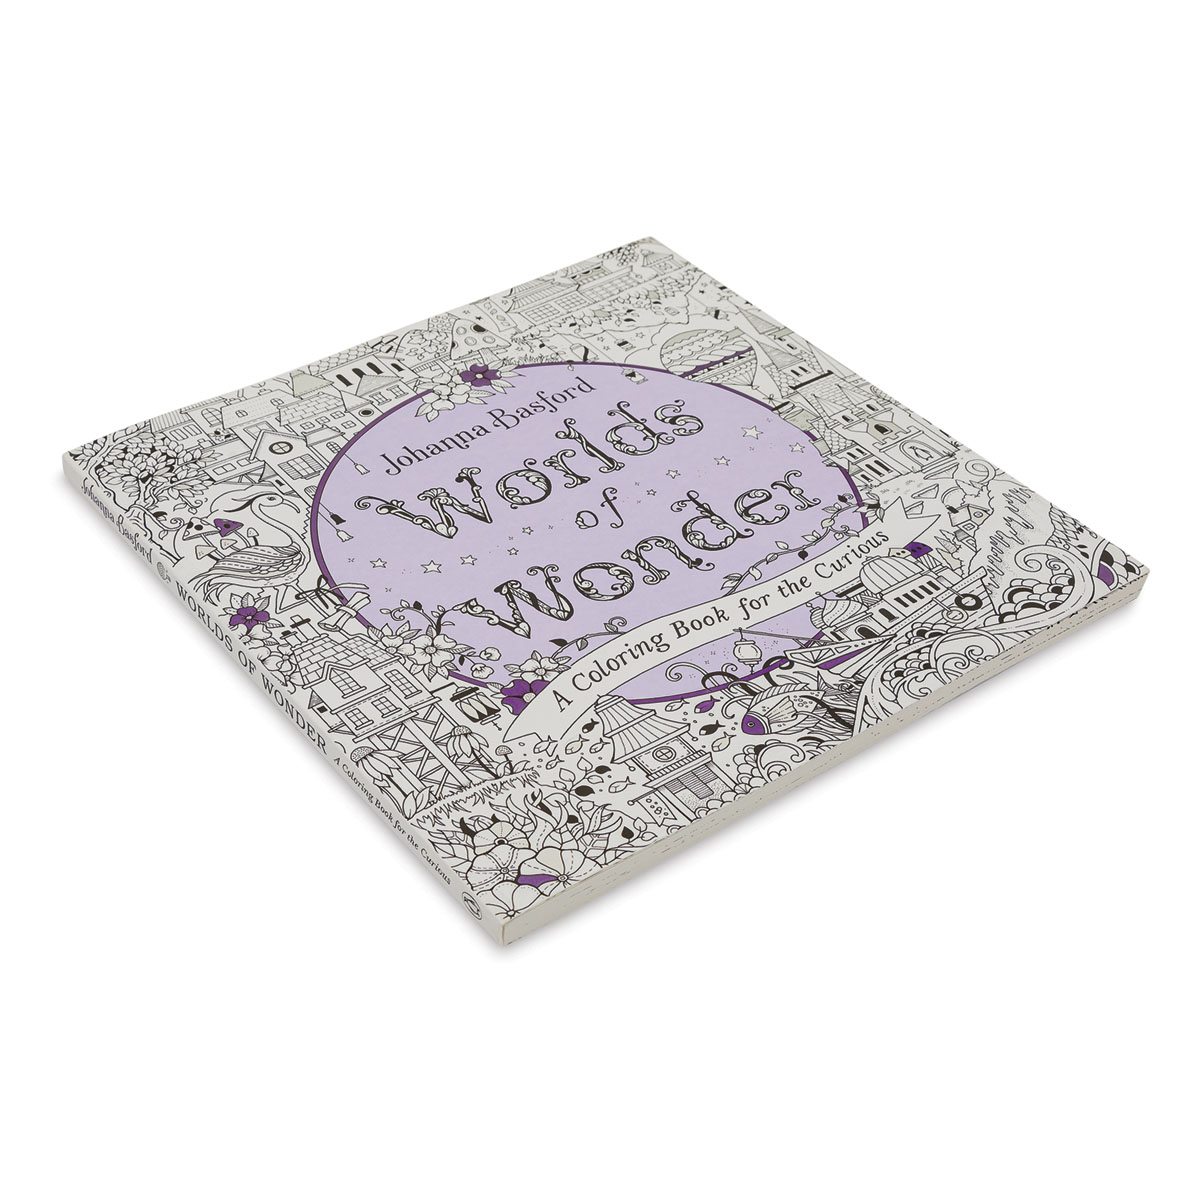 Worlds of Wonder: A Coloring Book for the Curious by Johanna